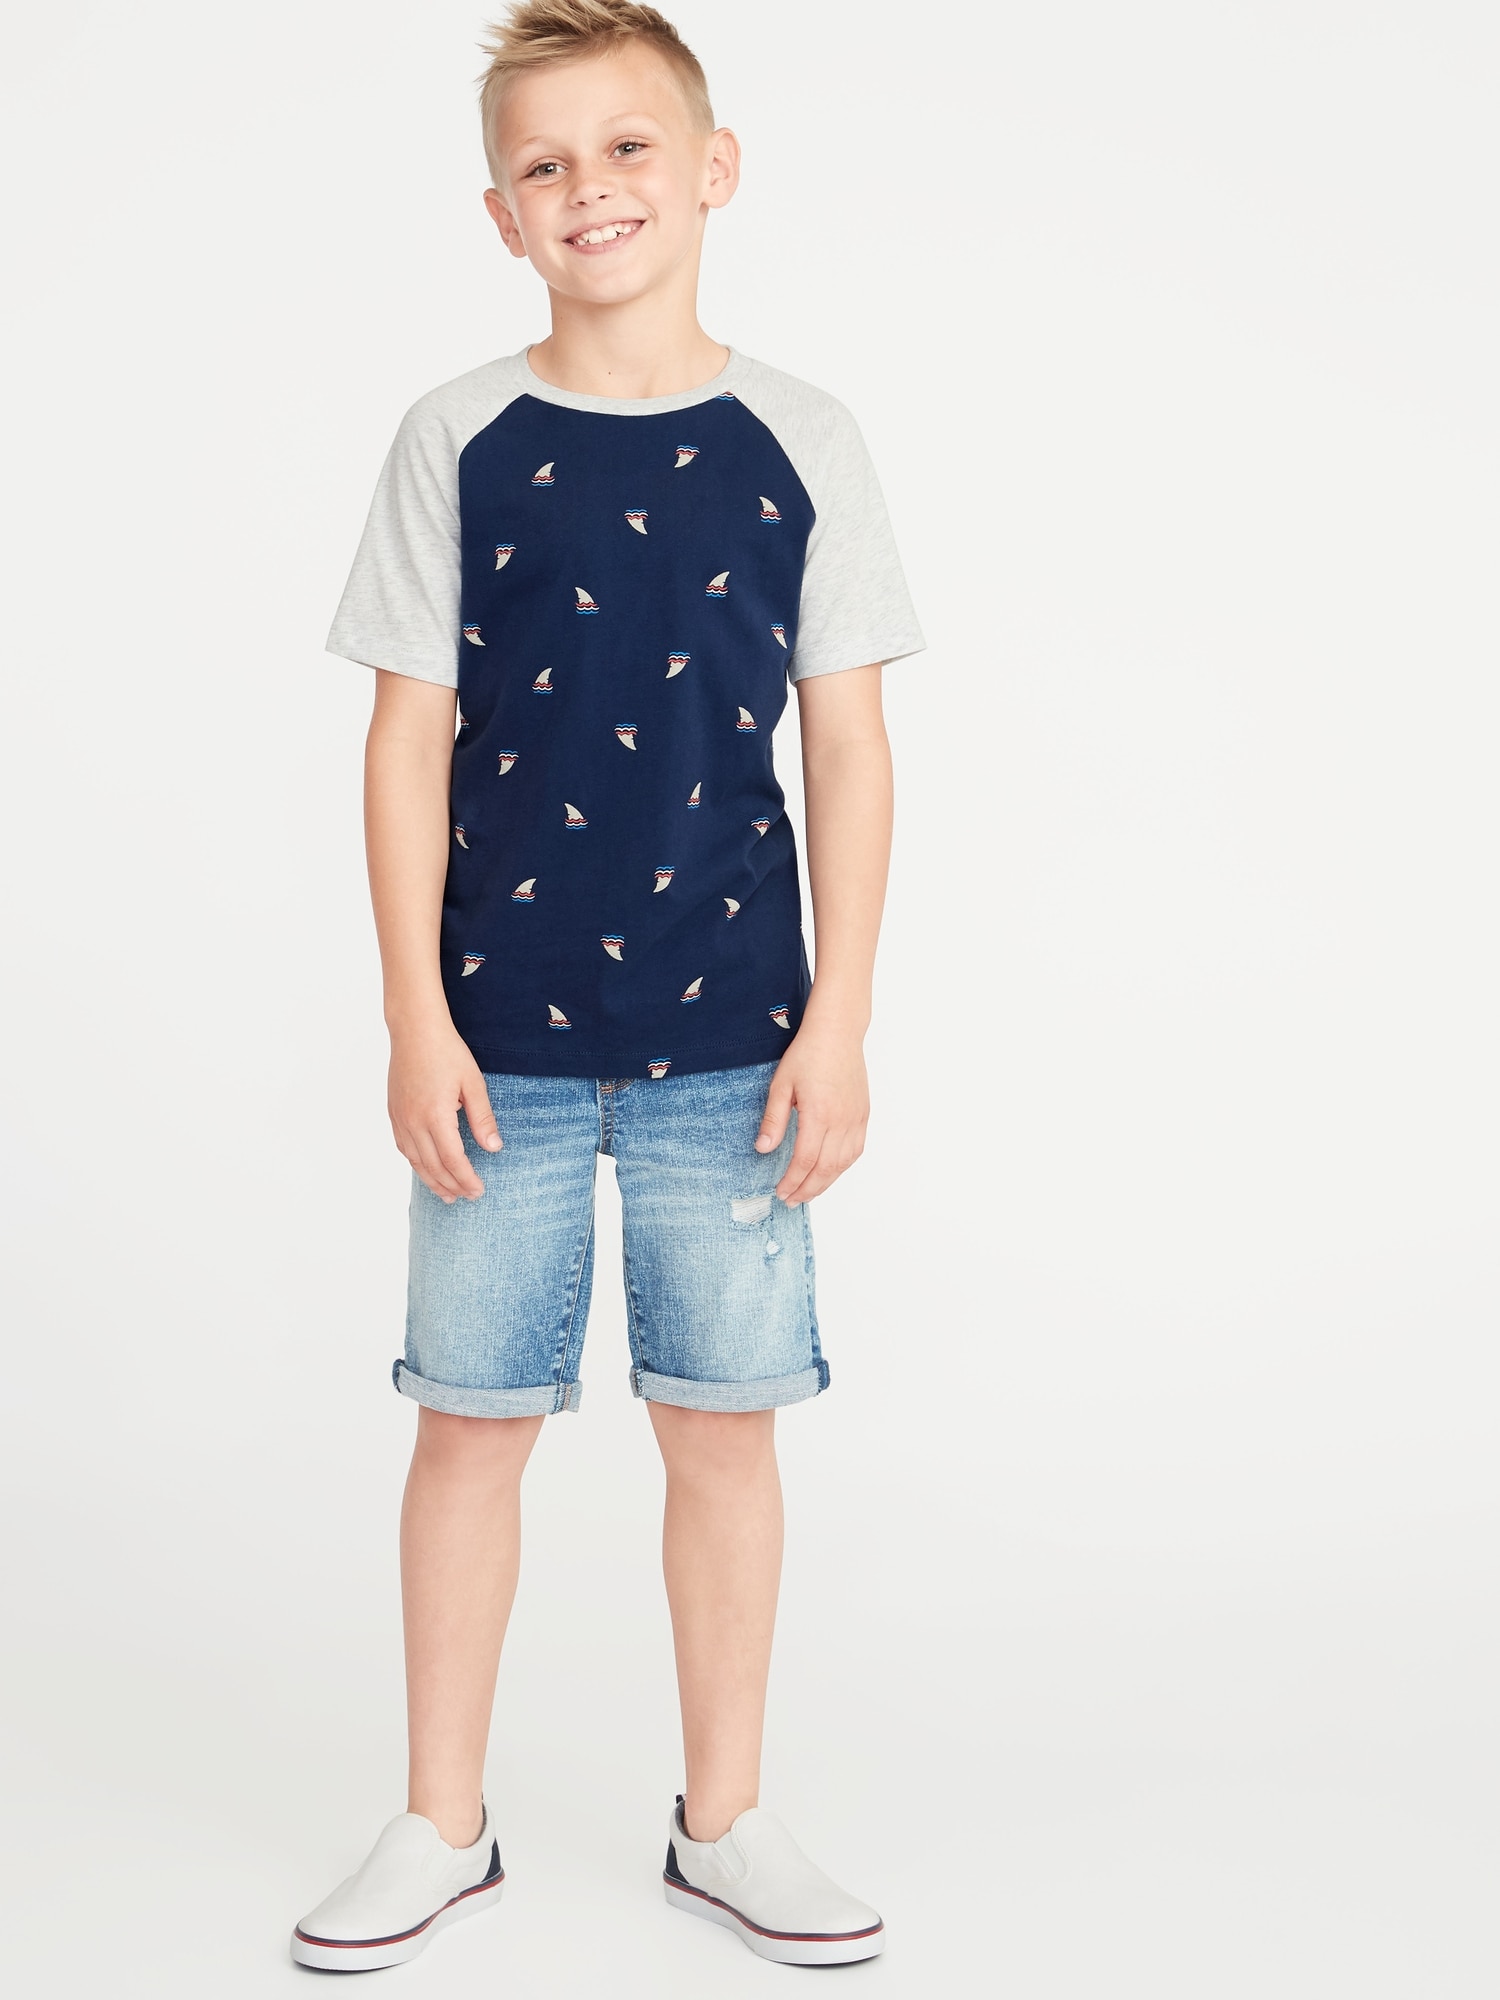 Softest Crew-Neck Tee 3-Pack For Boys | Old Navy